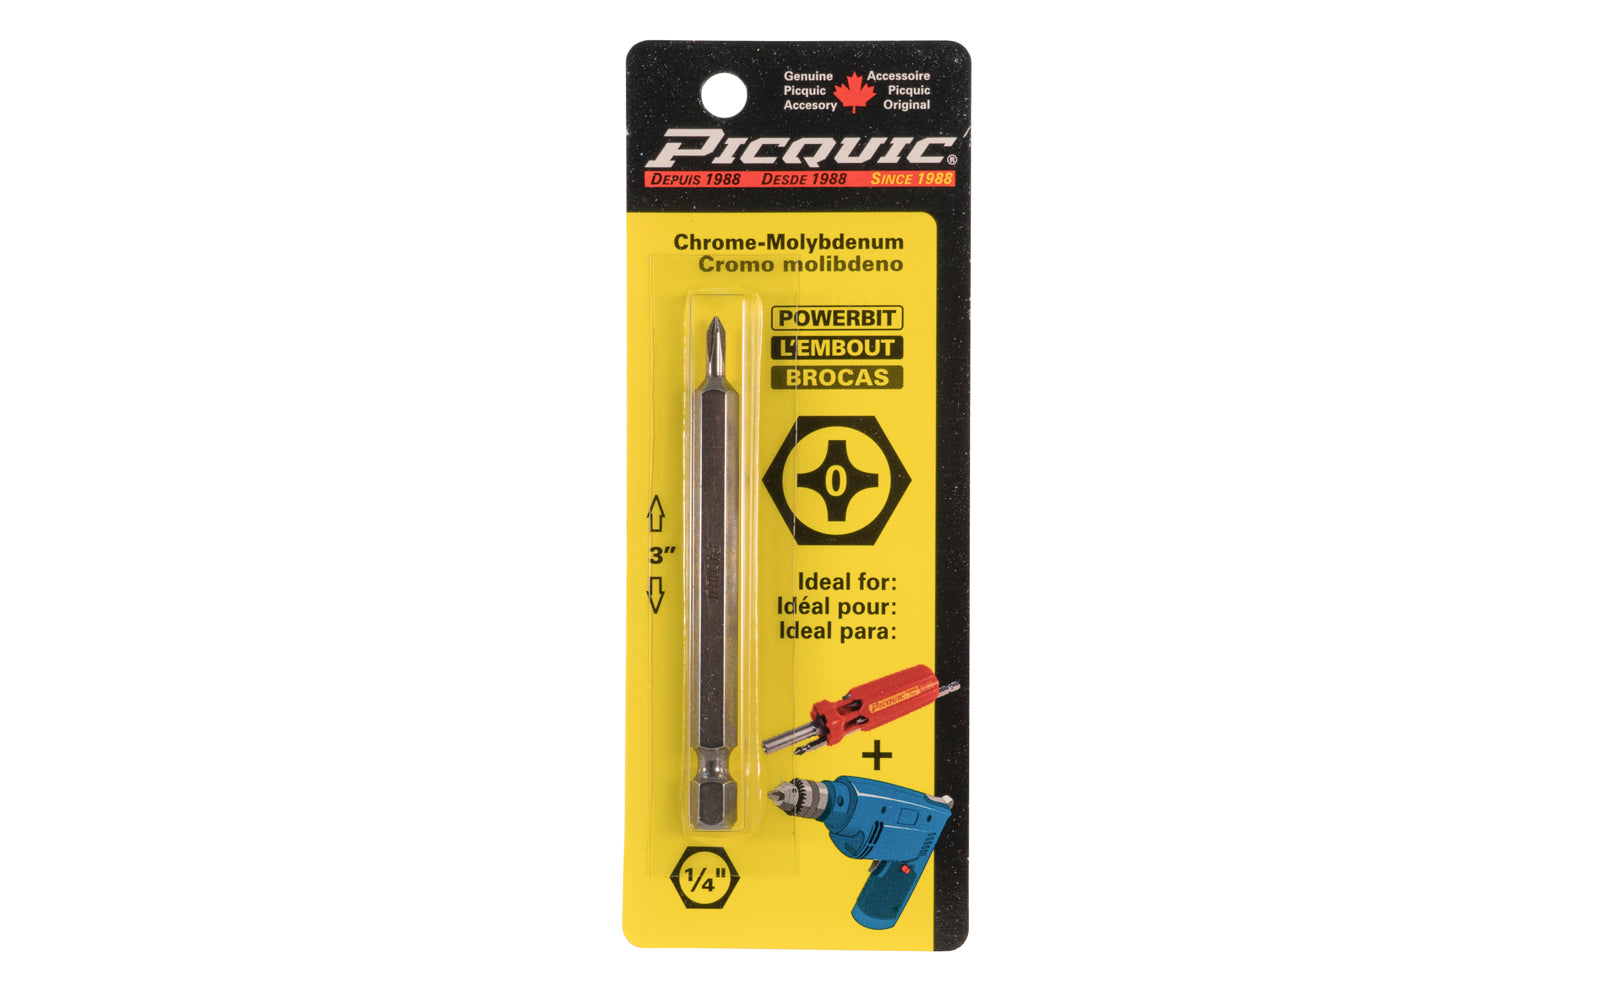 Picquic 3" length powerbit - #0 Phillips. 1/4" hex shank power bits ideal for use in drills & impact drivers. Picquic model 88020